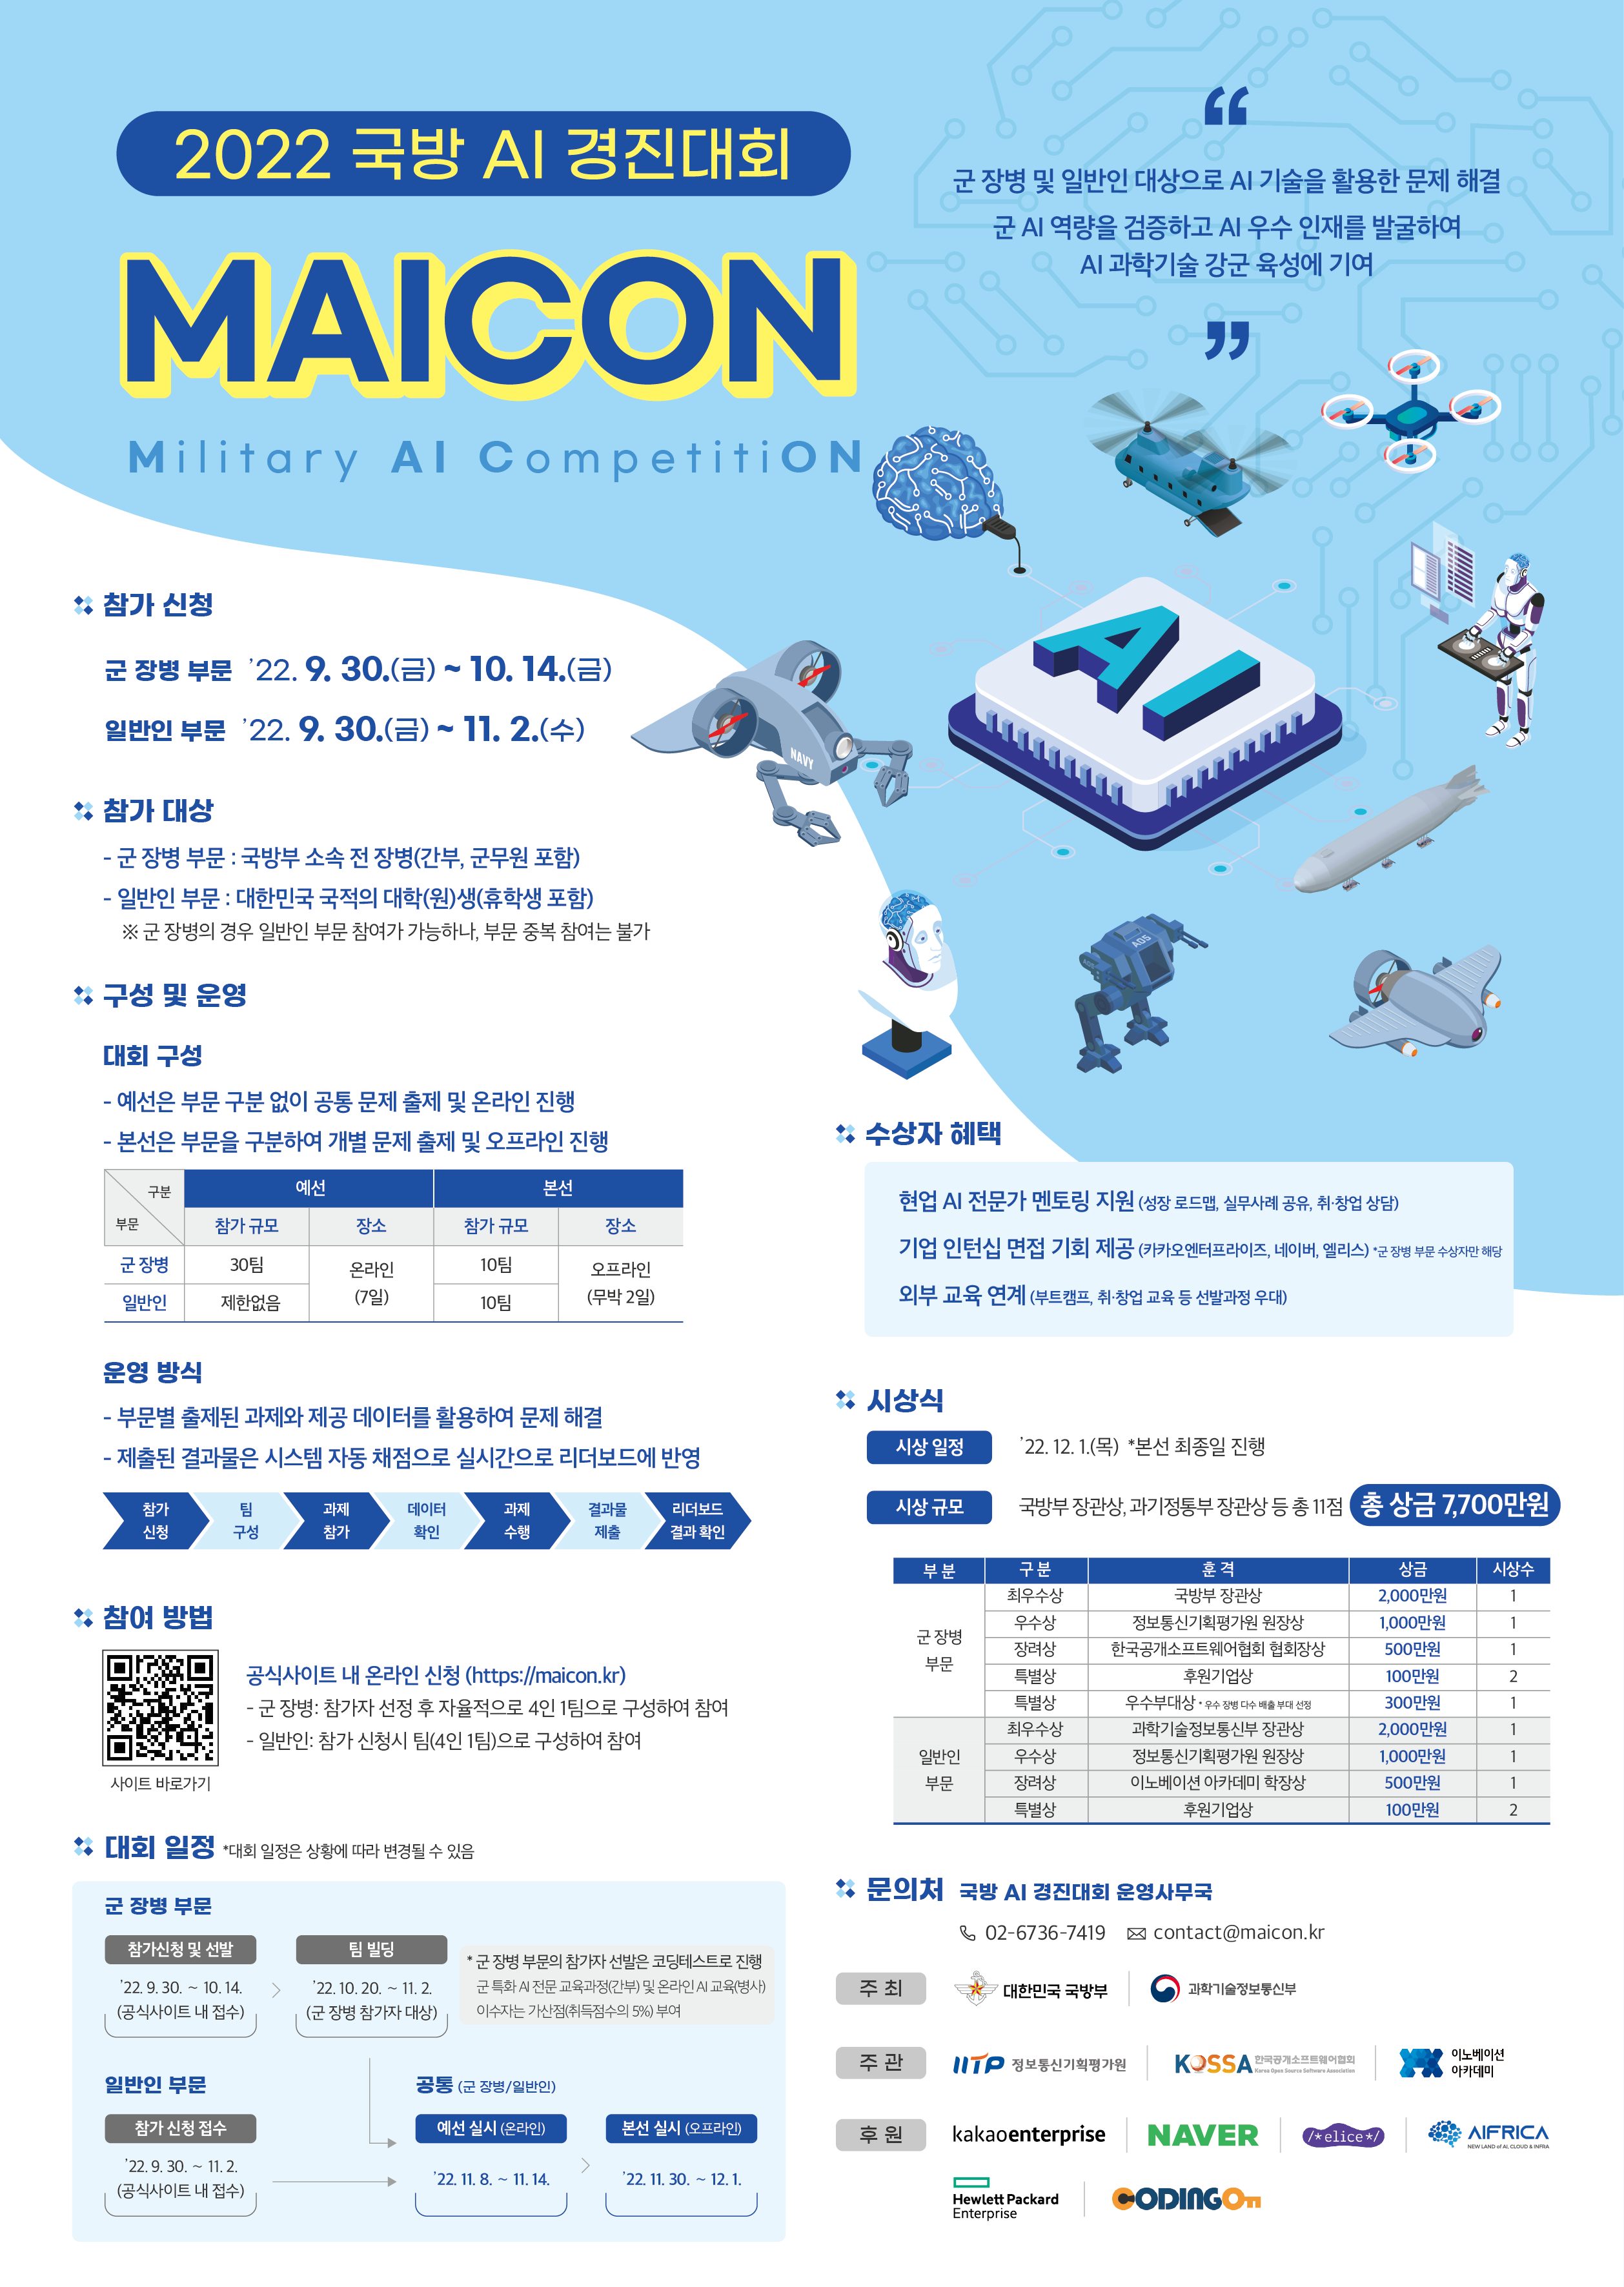 poster_2022maicon.png